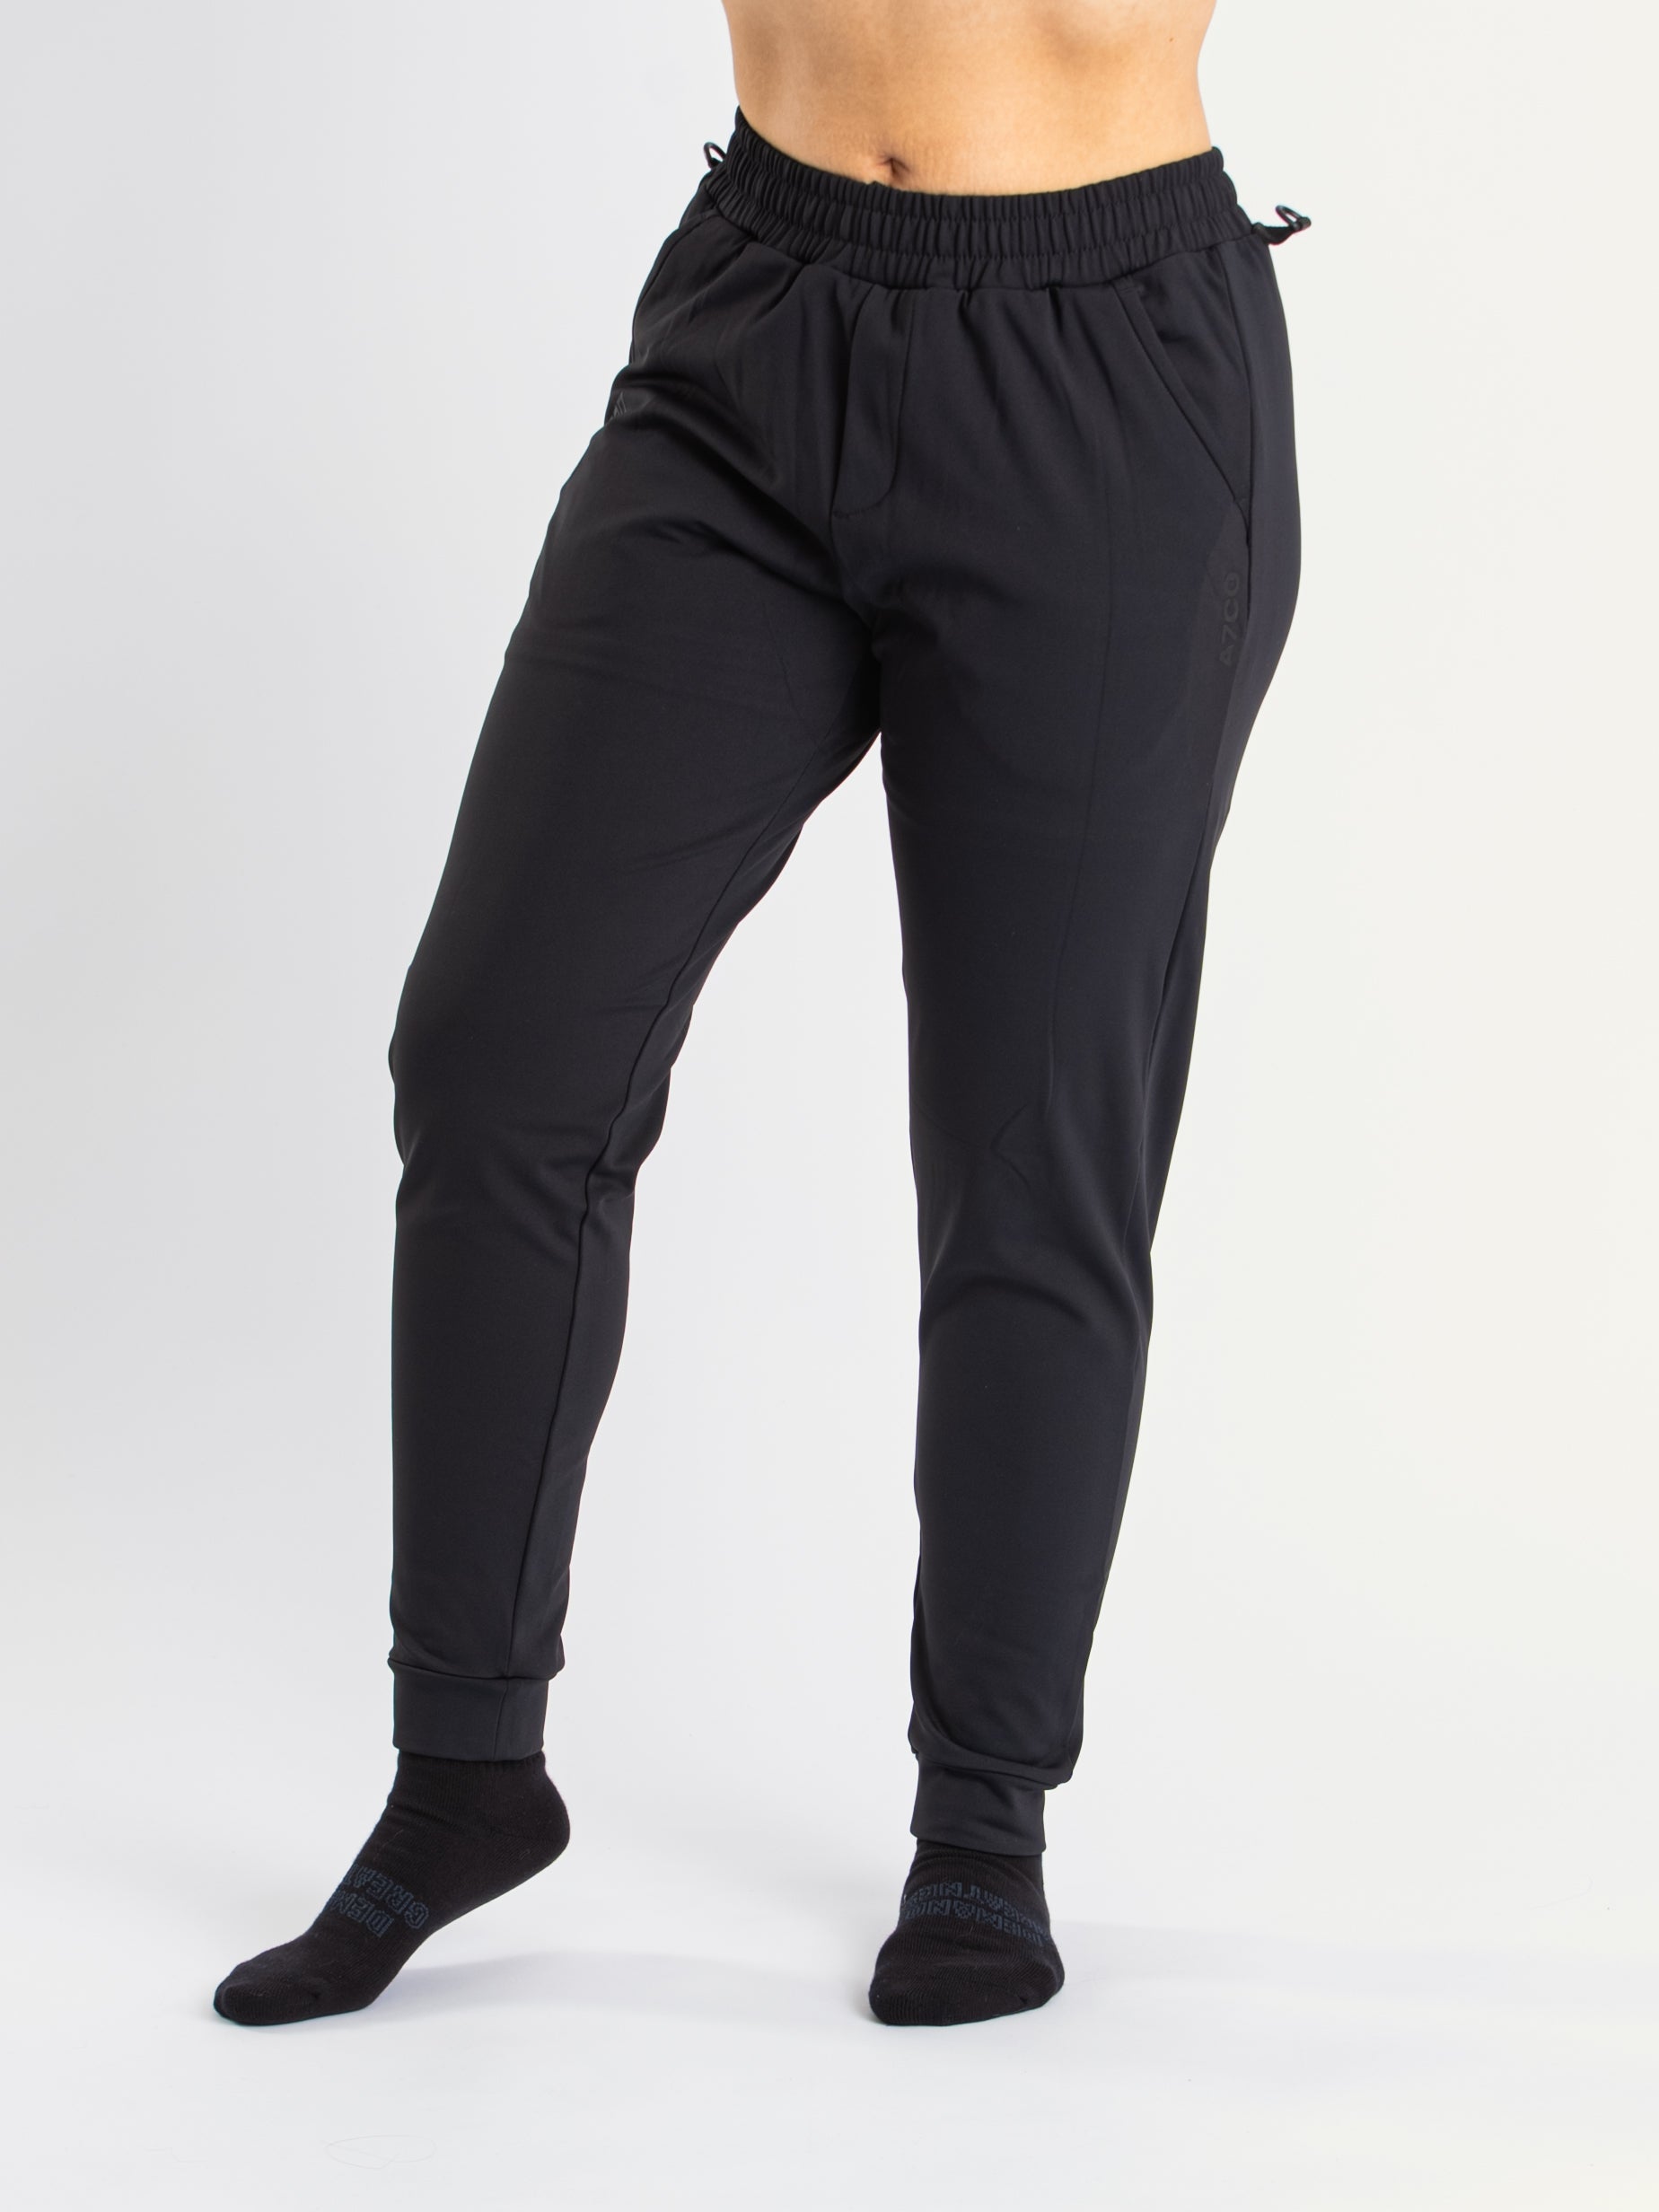 The Cobra 360Go 1Z Joggers, are designed for ultimate comfort and flexibility. Made with 360-degree stretch fabric, these joggers provide complete freedom of movement, perfect for strength training, and everyday wear. The built-in super-soft performance liner adds an extra layer of comfort, while the soft fleece inner feel ensures warmth and coziness. Designed with a unisex fit, it pairs perfectly with our matching Cobra Quarter Zip Jacket. 